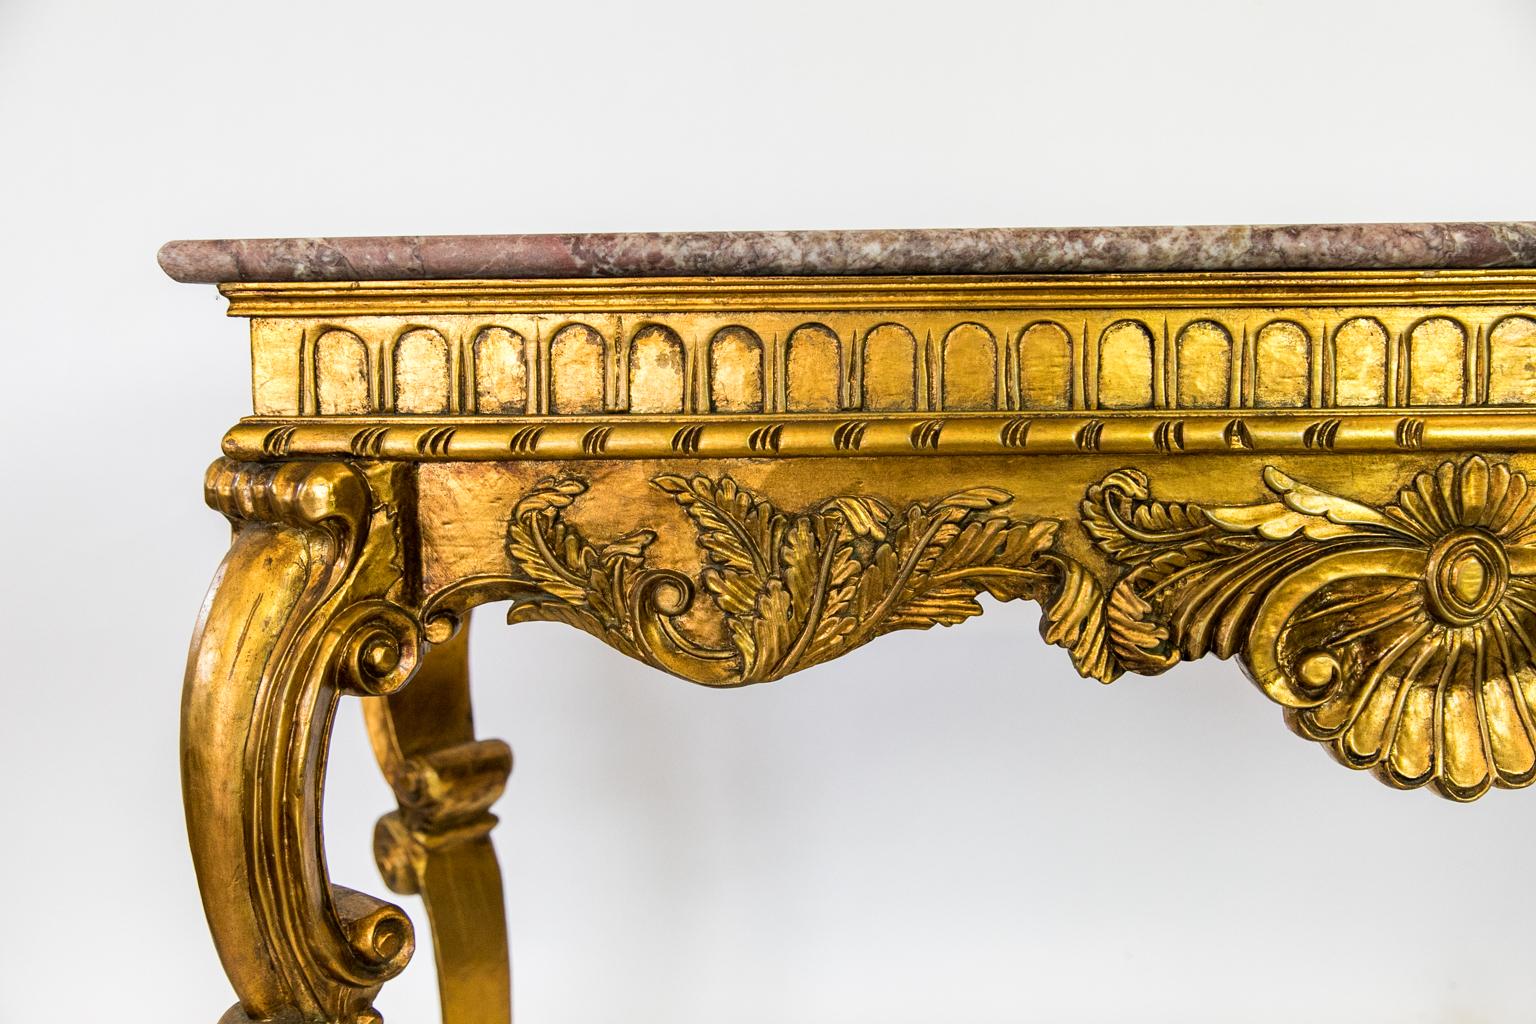 gold console table marble top